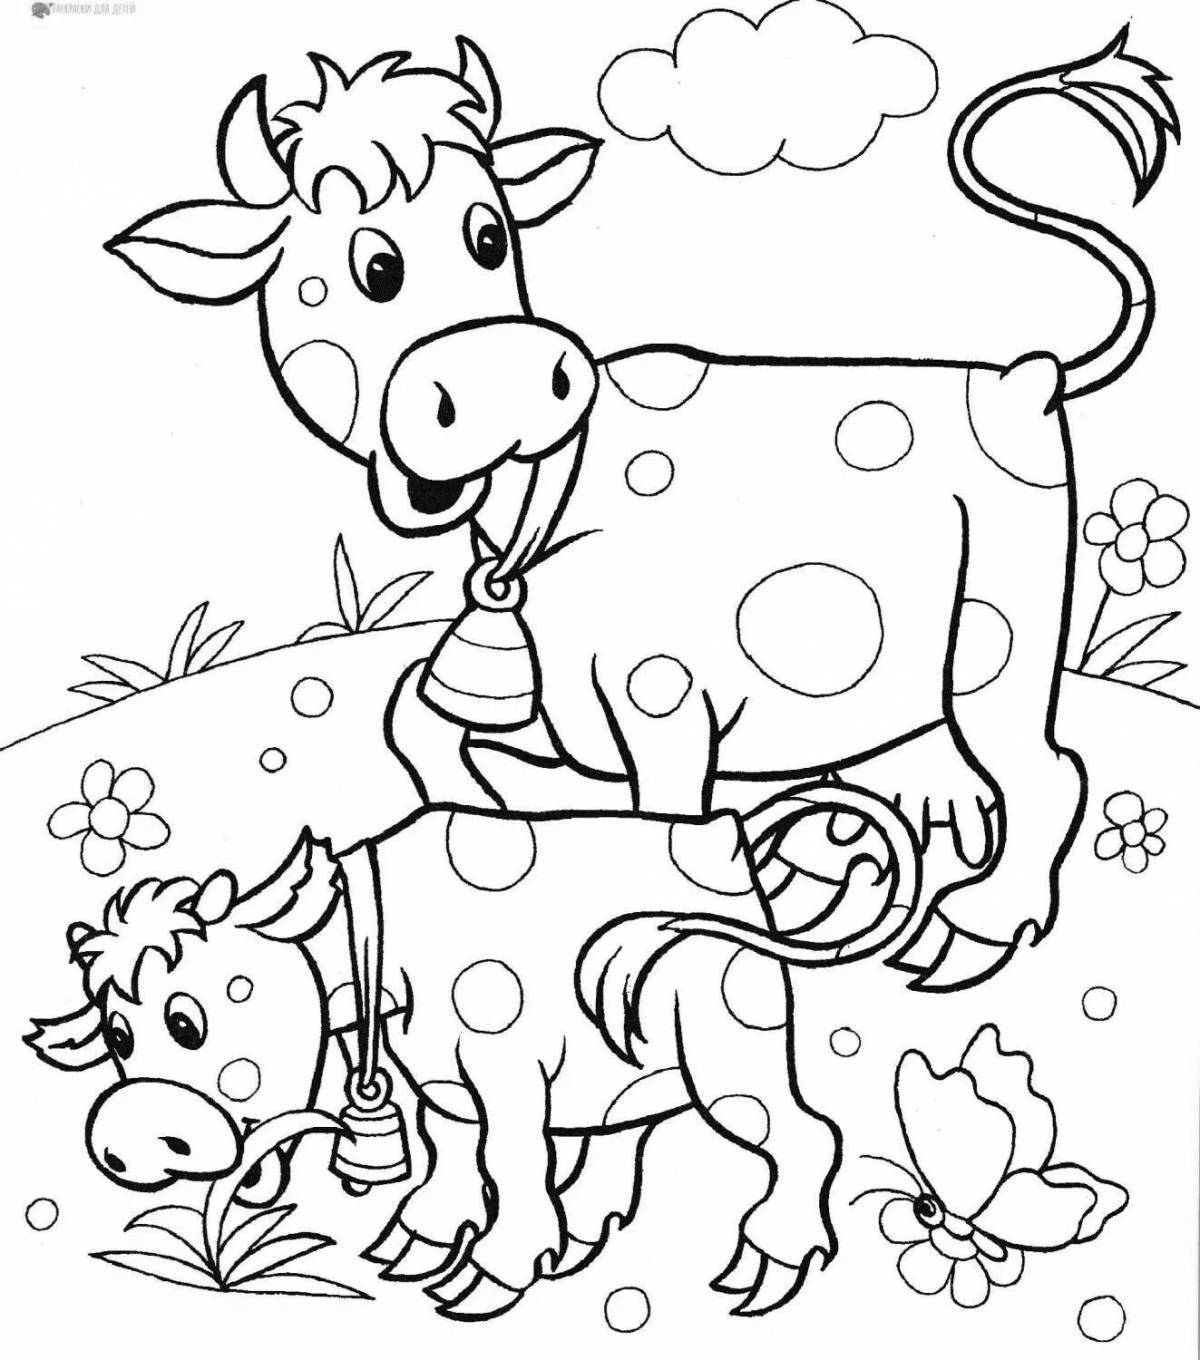 Happy cow coloring book for kids